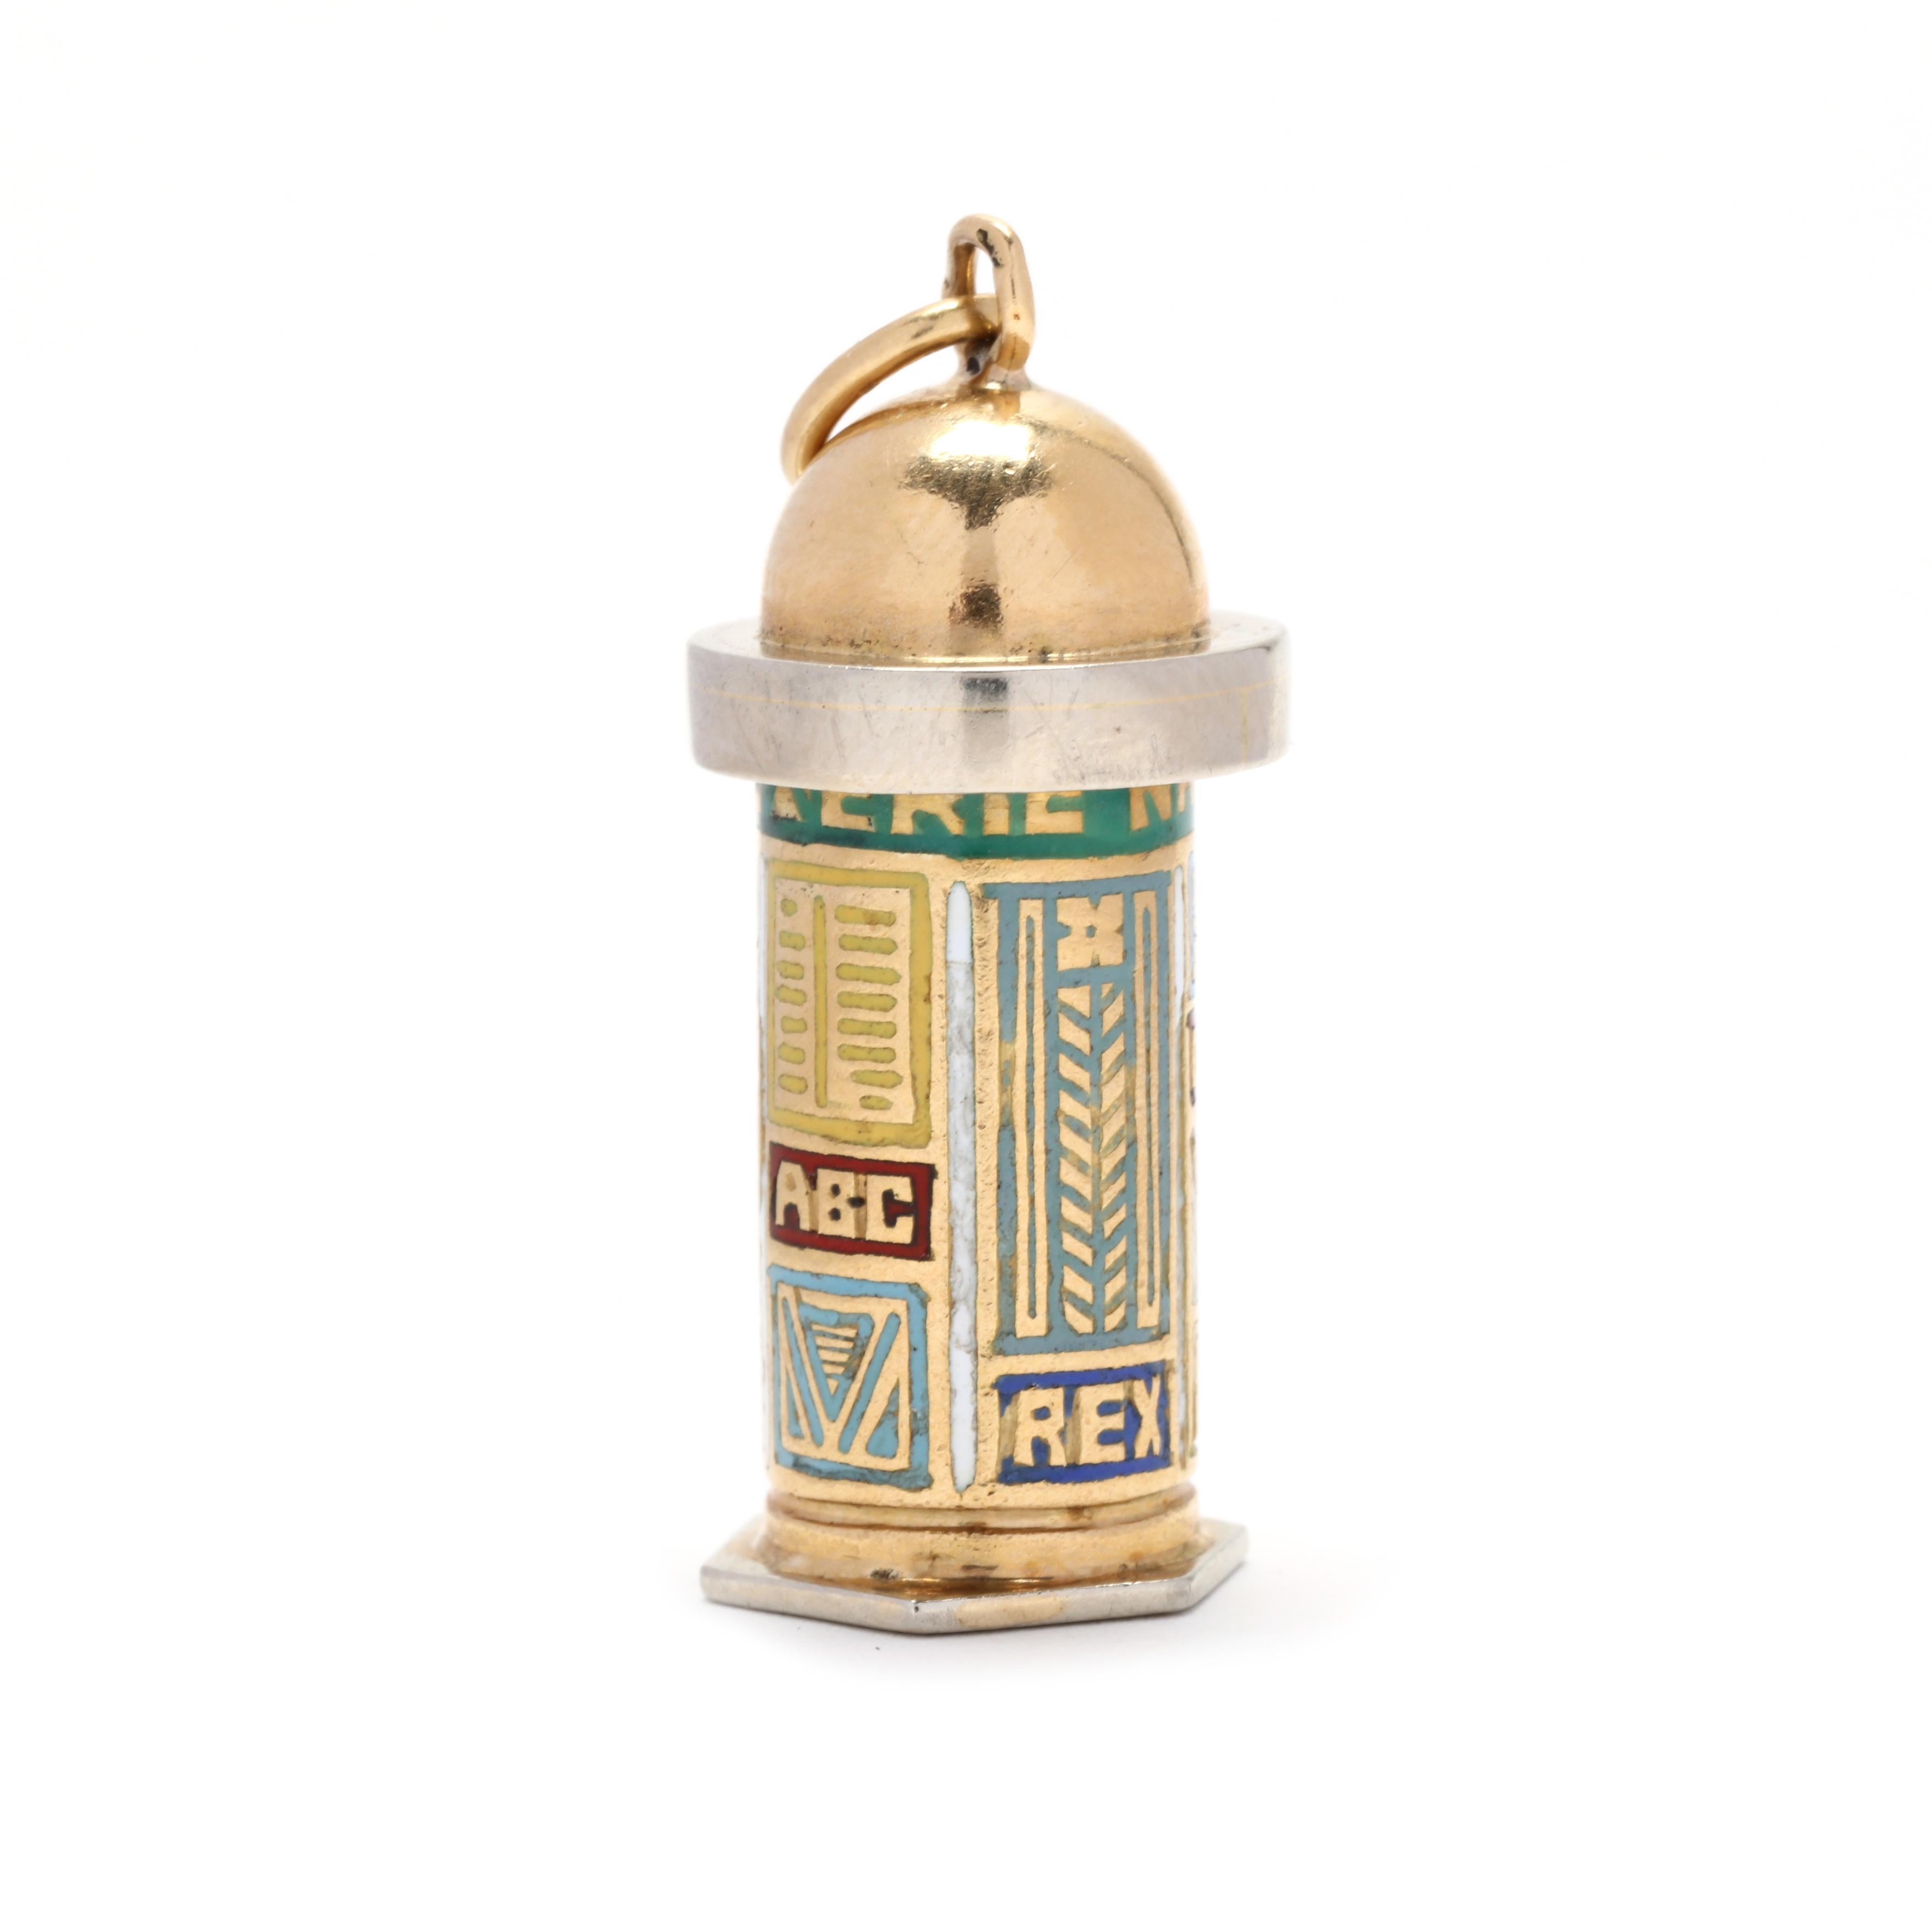 A vintage 18 karat yellow gold French Paris new kiosk charm. This charm features a cylindrical design with a domed top and a hexagonal bottom, and with multi-colored ename detailing. This charm also features French hallmarks on the bail.

Length: